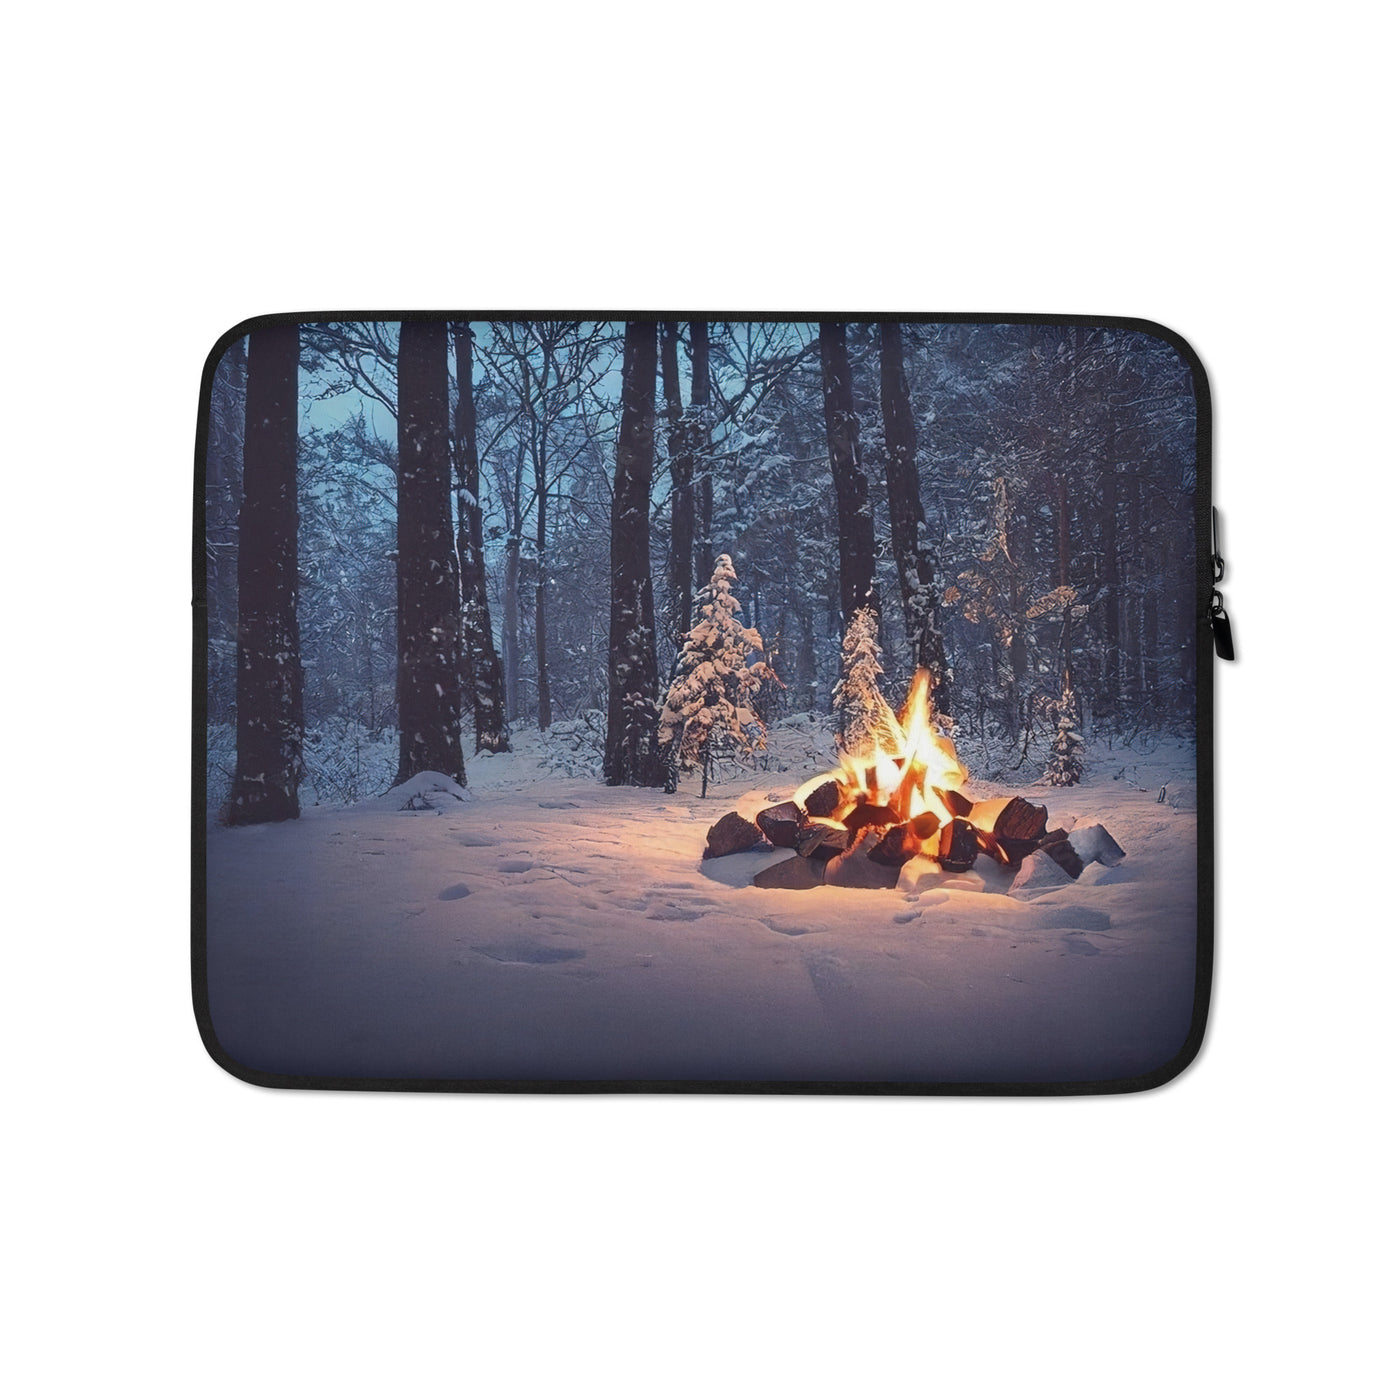 Lagerfeuer im Winter - Camping Foto - Laptophülle camping xxx 13″